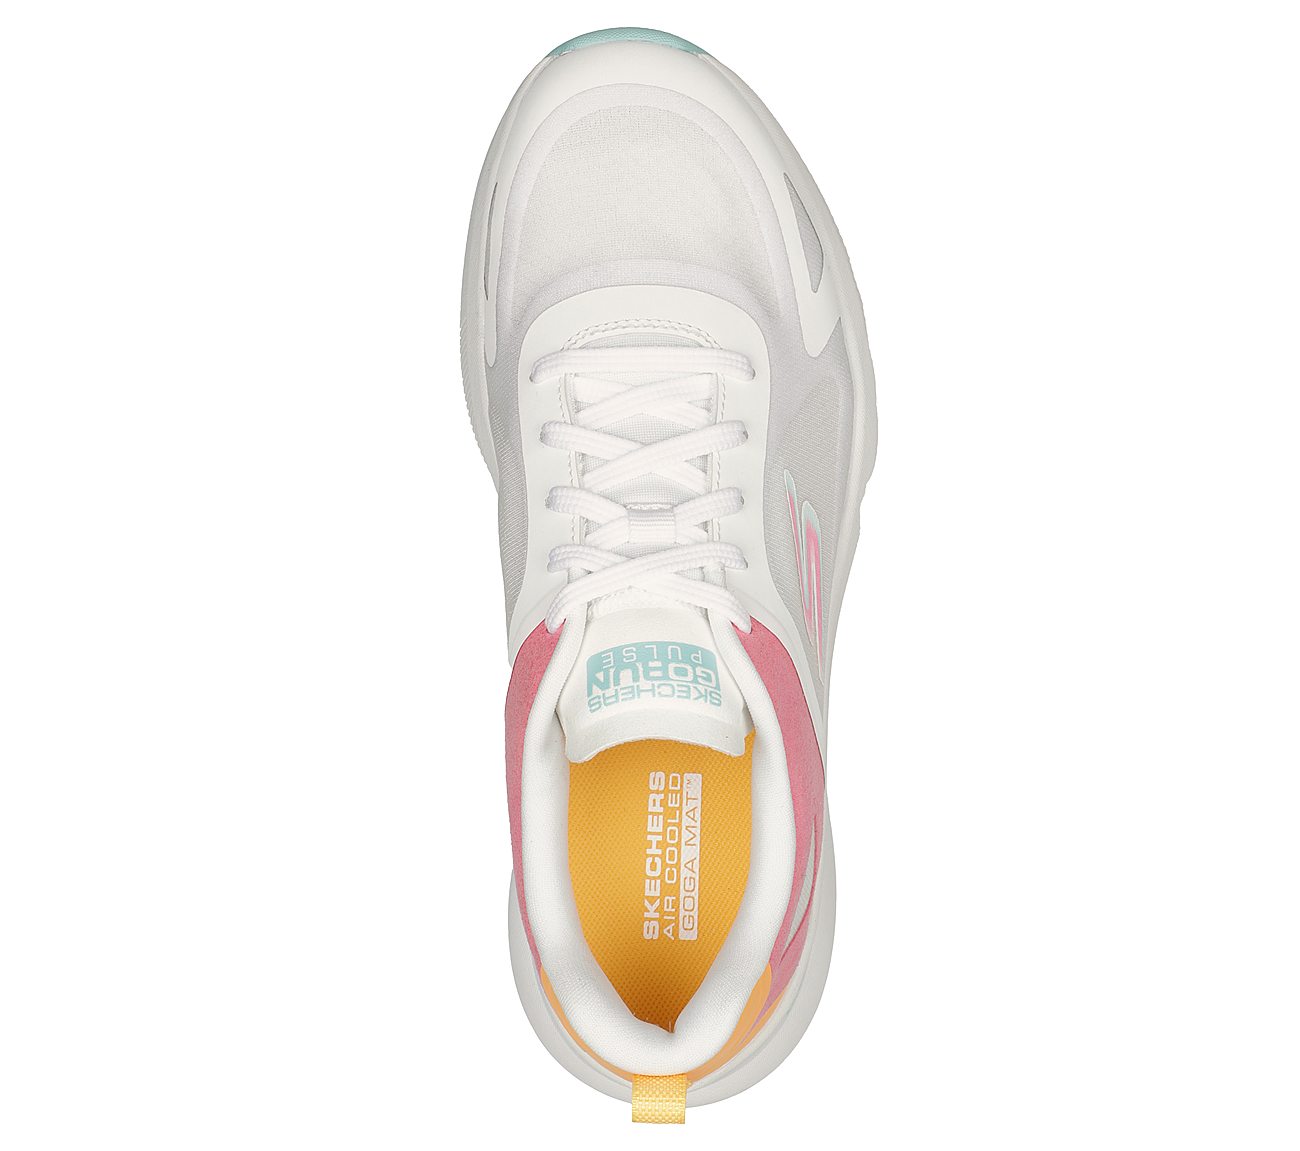 GO RUN PULSE - OPERATE, WHITE/HOT PINK Footwear Top View